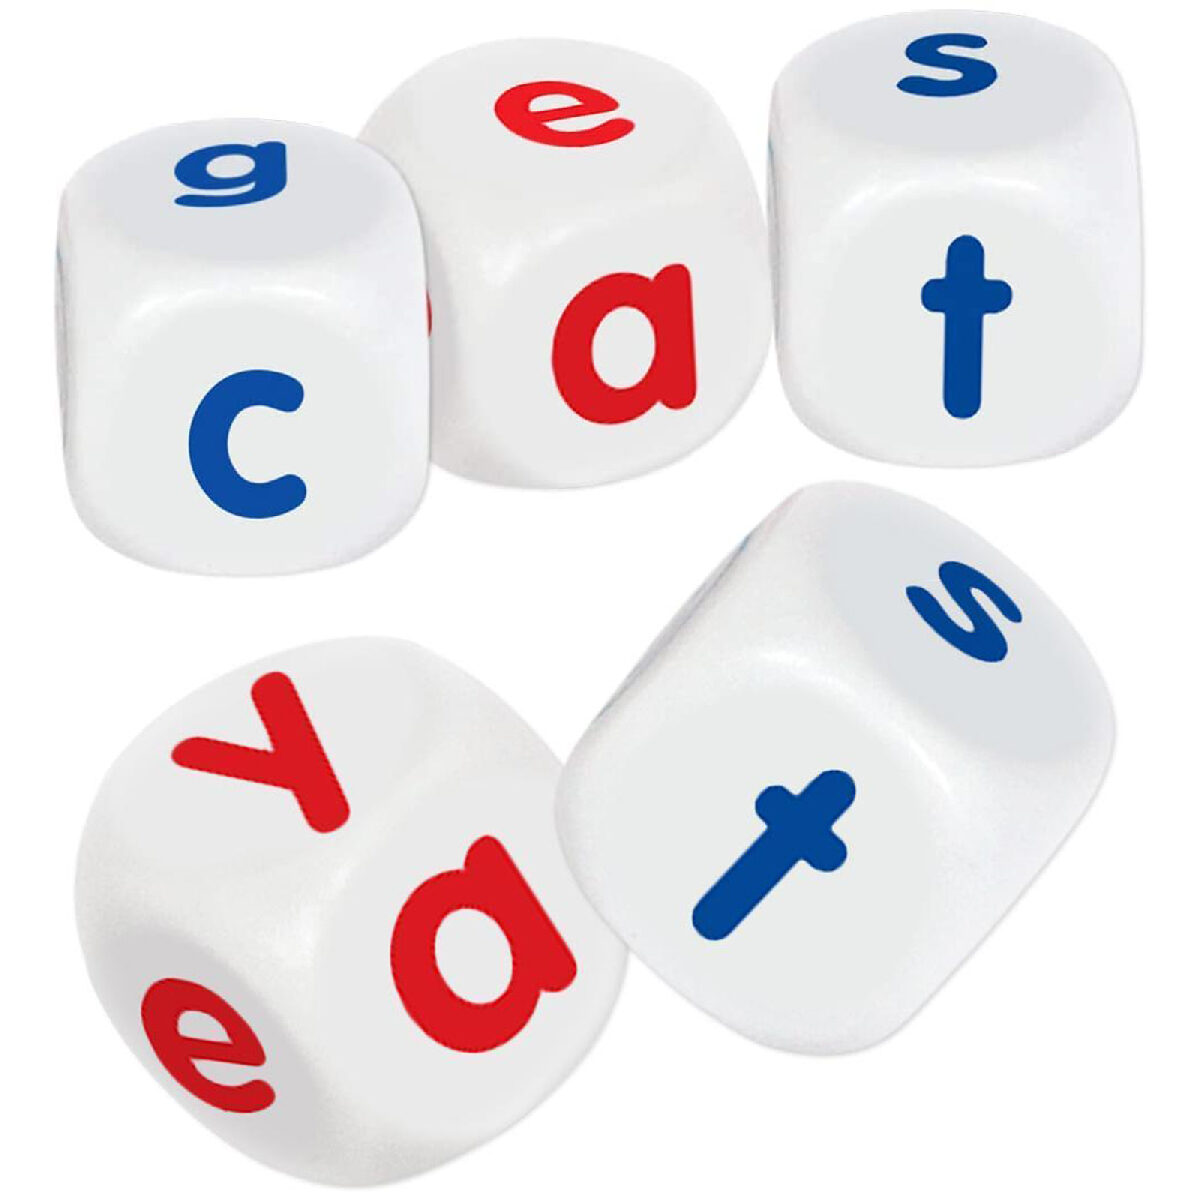 25-tabletop-letter-word-games-for-families-and-school